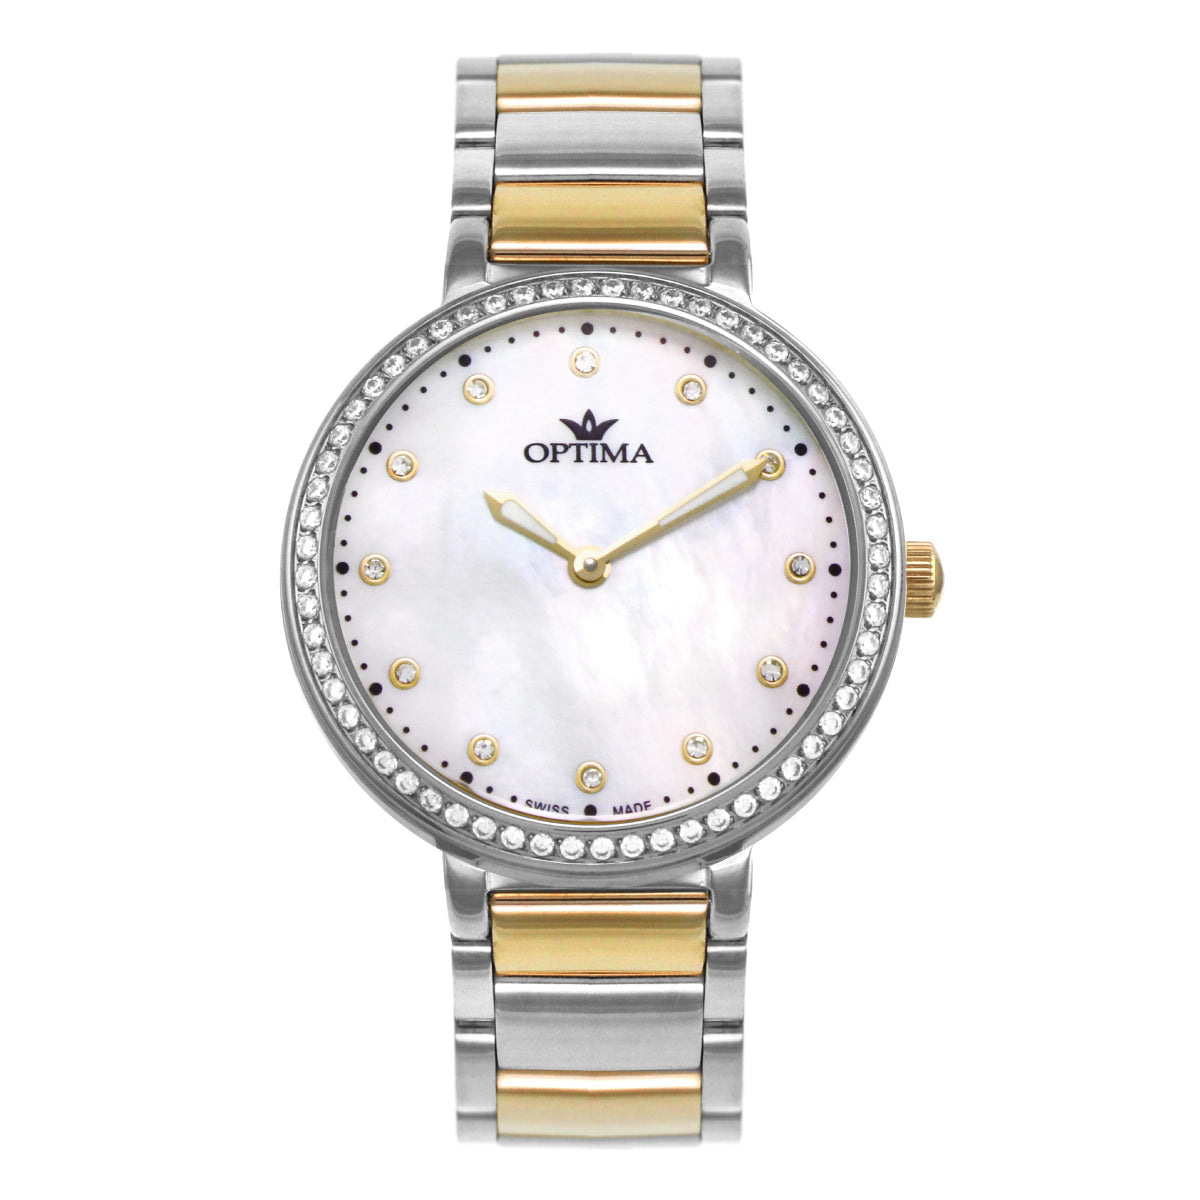 Optima Women's Swiss Quartz Watch with Pearly White Dial - OPT-0030